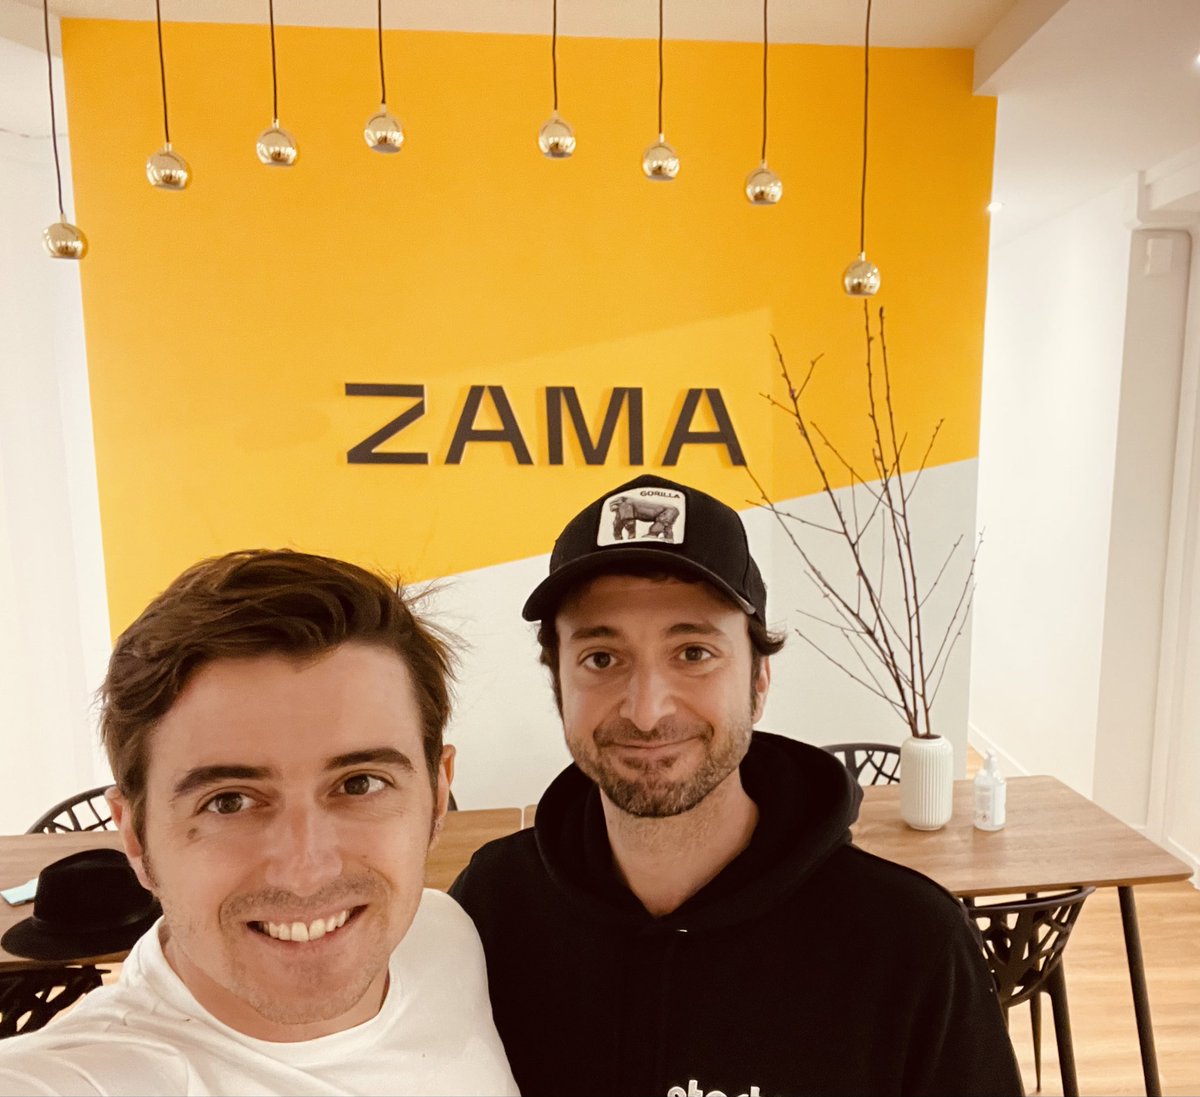 Two years ago to the day, on May 3rd, 2022, in the early days of @zama_fhe with my friend @randhindi. It's been an incredible journey so far, and I'm very glad to be a part of it. FHE 🚀